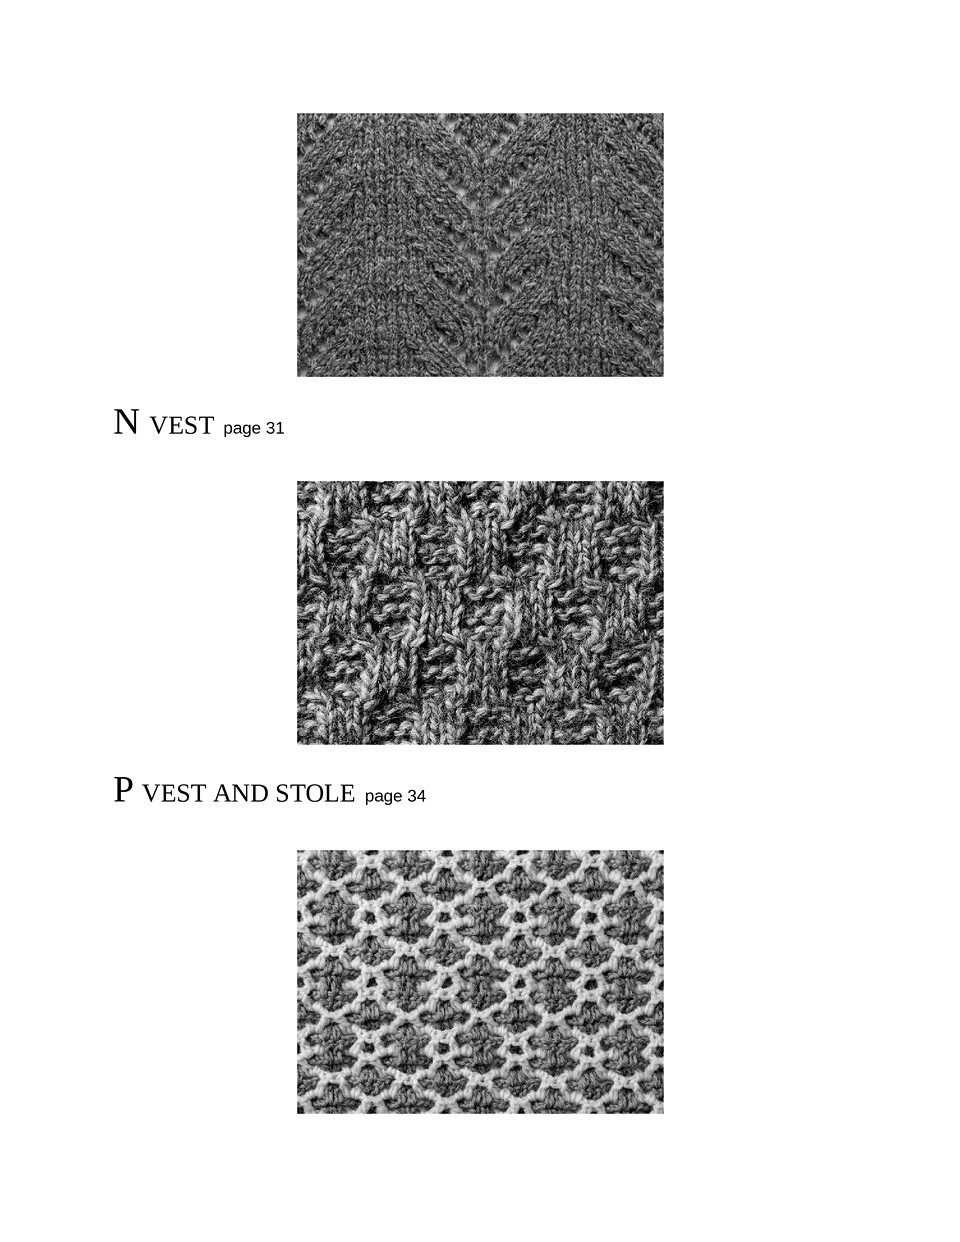 Japanese Knitting Patterns for Sweaters Scarves and More-201